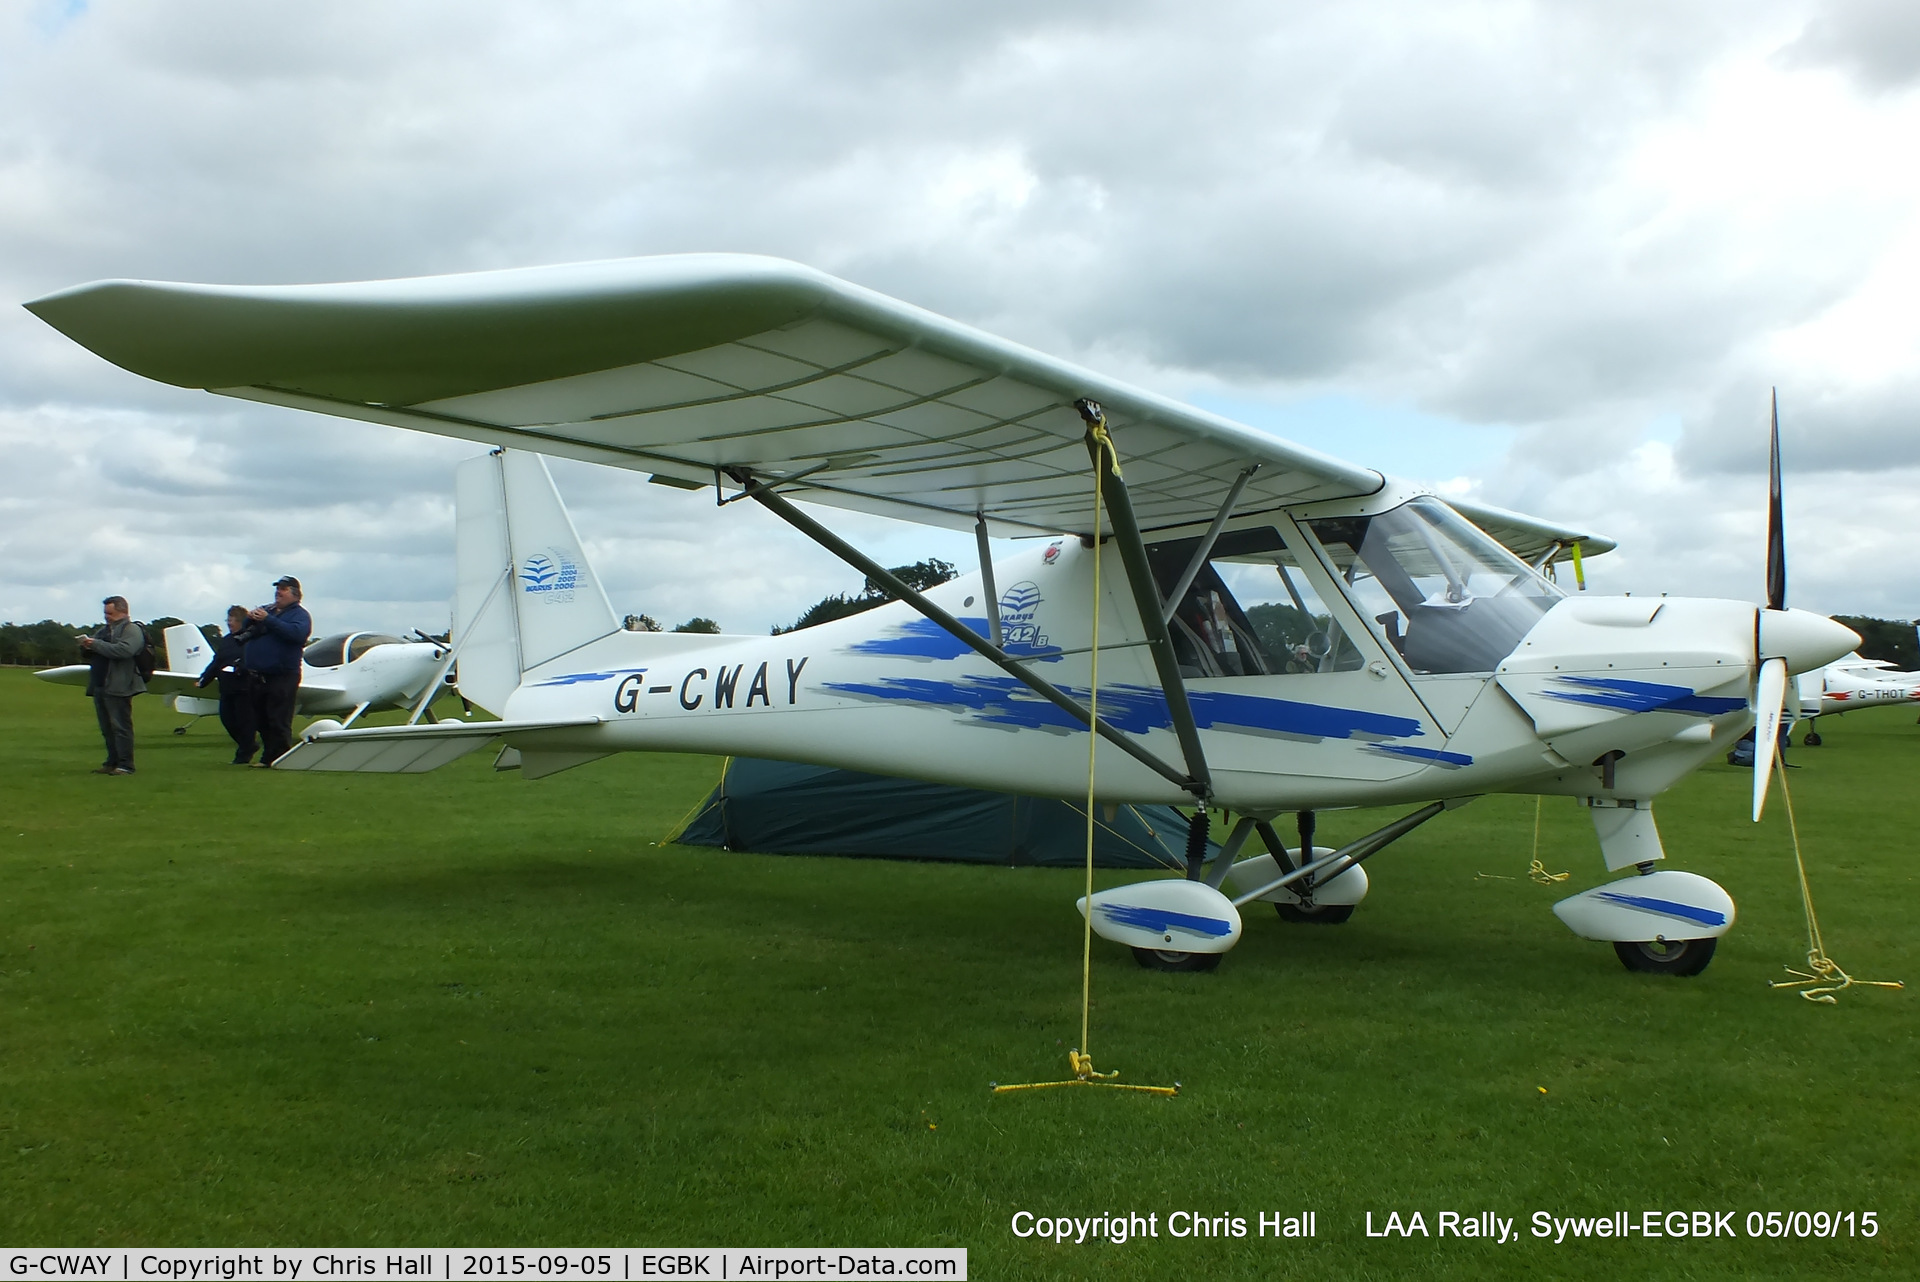 G-CWAY, 2007 Comco Ikarus C42 FB100 C/N 0707-6907, at the LAA Rally 2015, Sywell